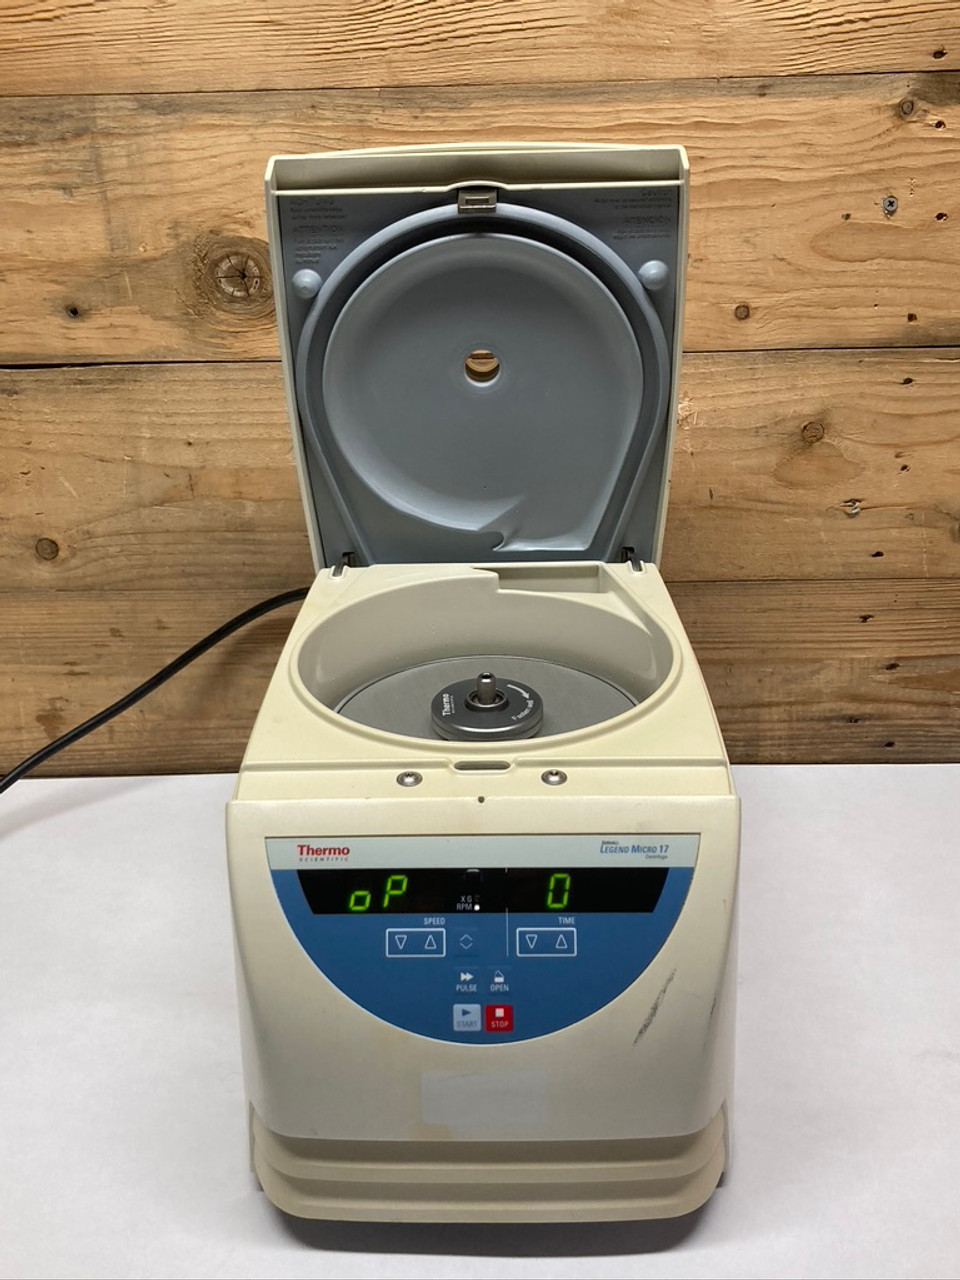 SORVALL Legend Micro 17 Microcentrifuge 75002494 ThermoFisher